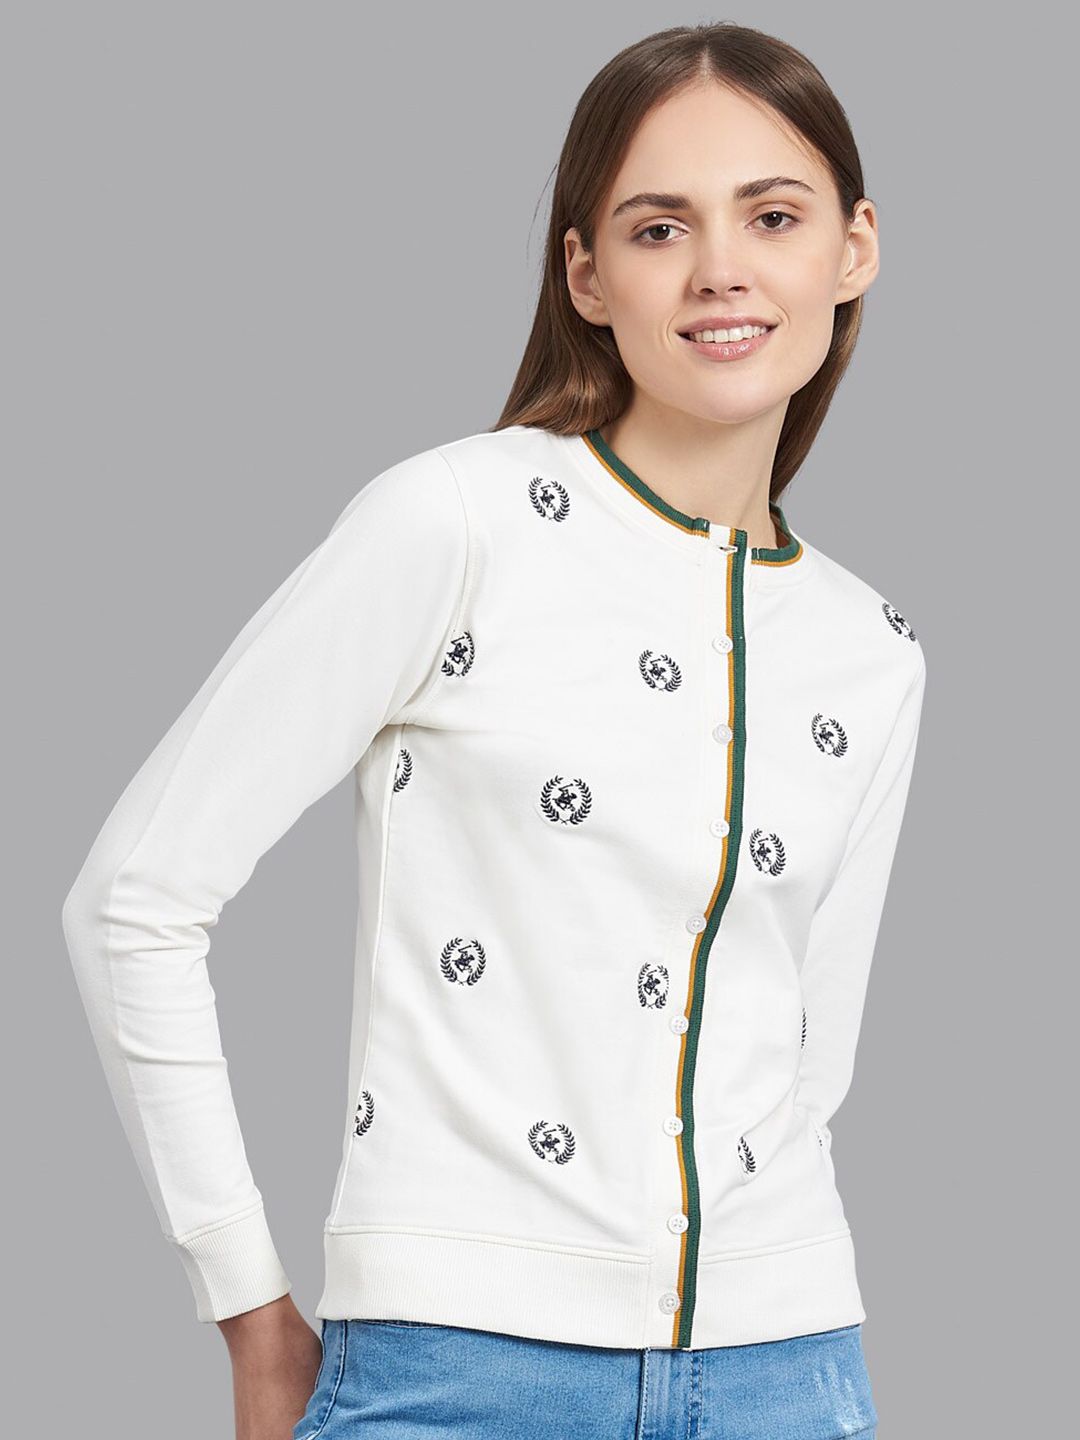 Beverly Hills Polo Club Women White Printed Cardigan Price in India